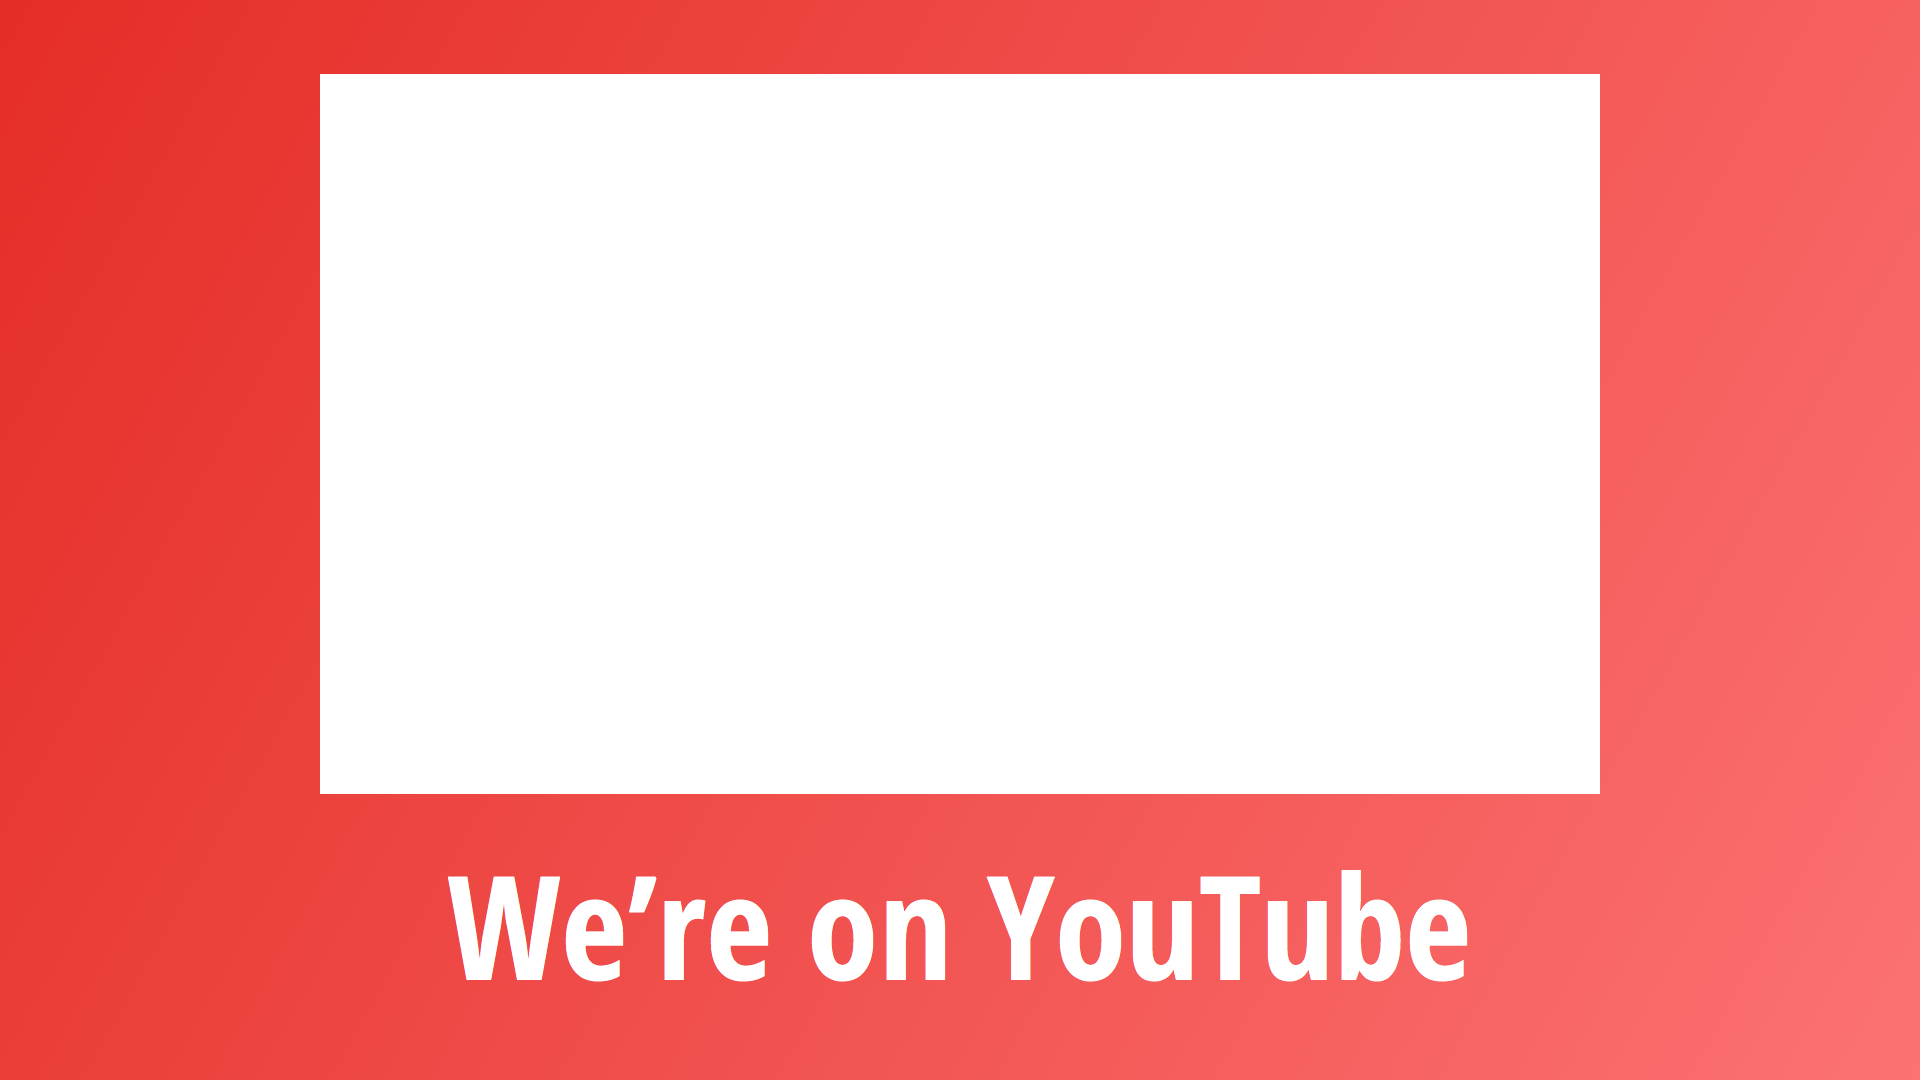 youtube wallpaper,red,text,pink,font,rectangle